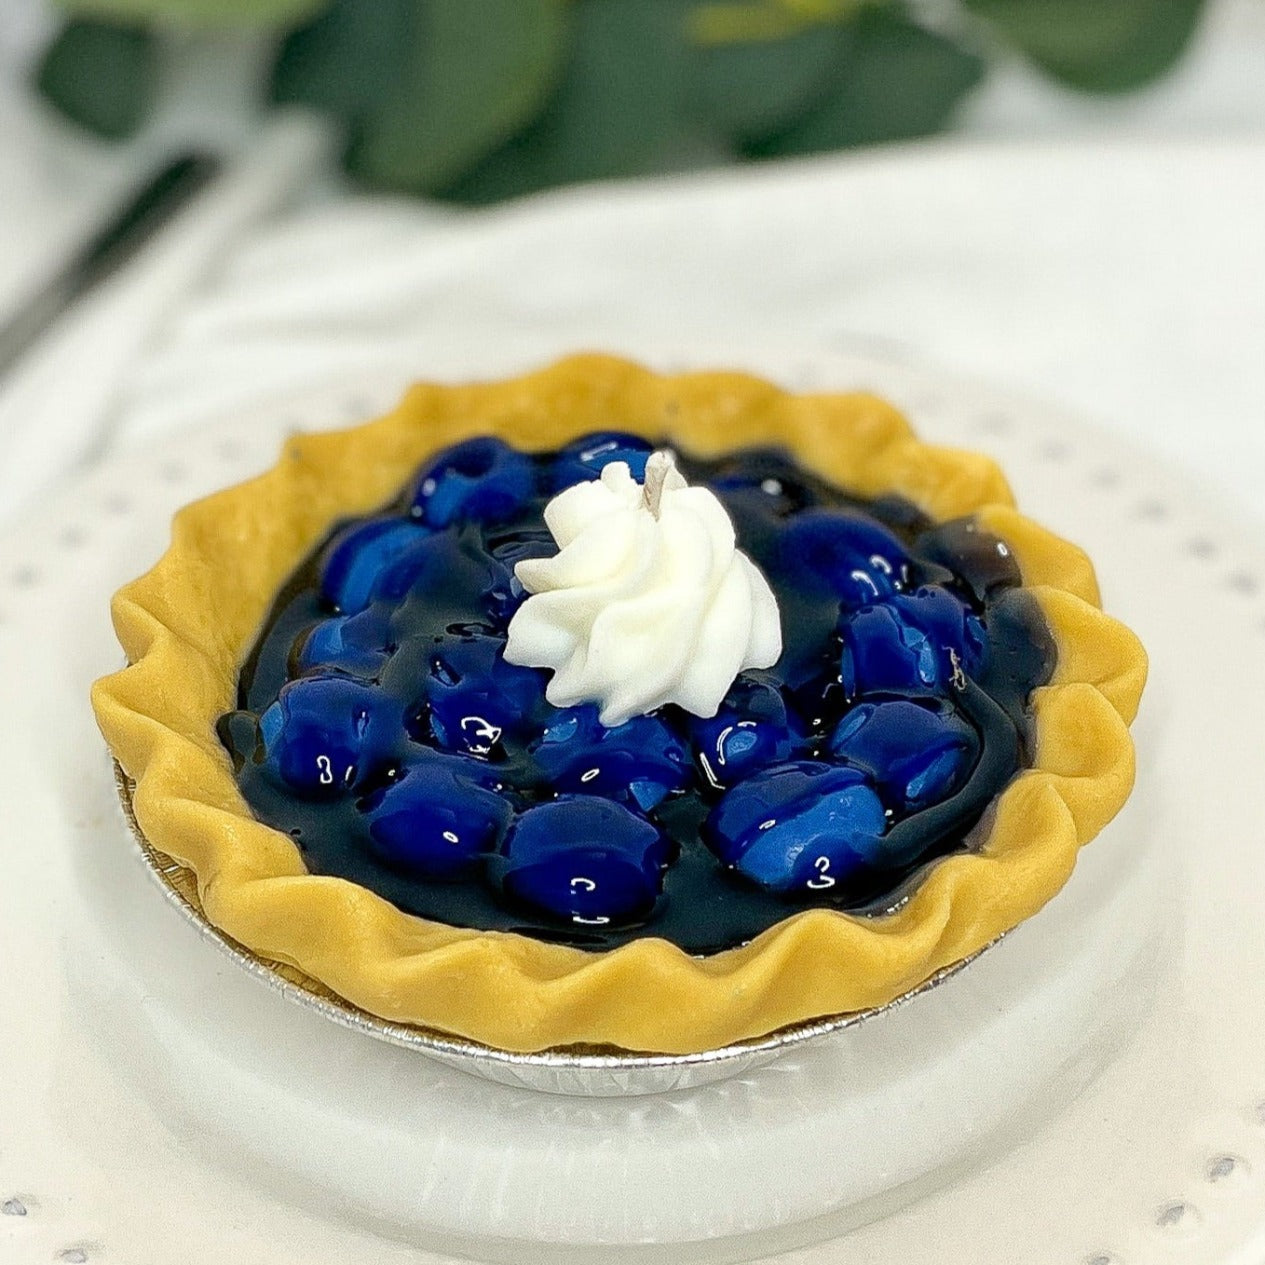 Blueberry Pie ala Mode - Scented Soy Wax Candle